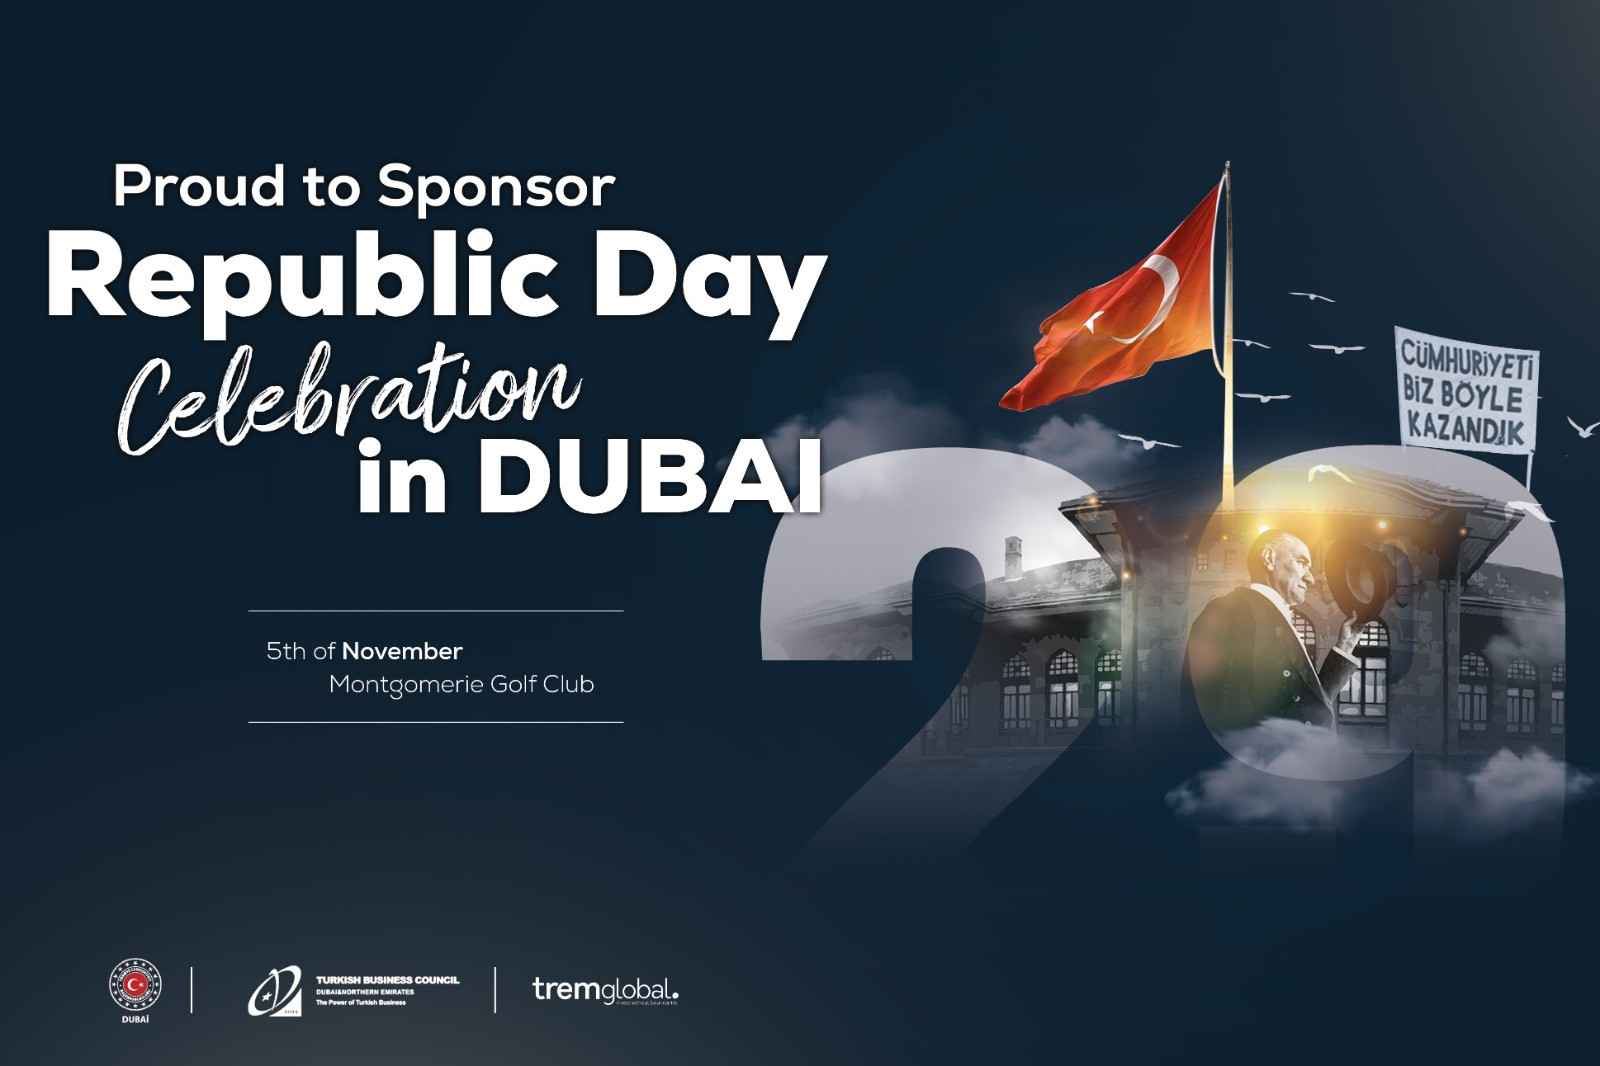 Trem Global Is Sponsoring the Celebration of the 99th Anniversary of The Turkish Republic in Dubai